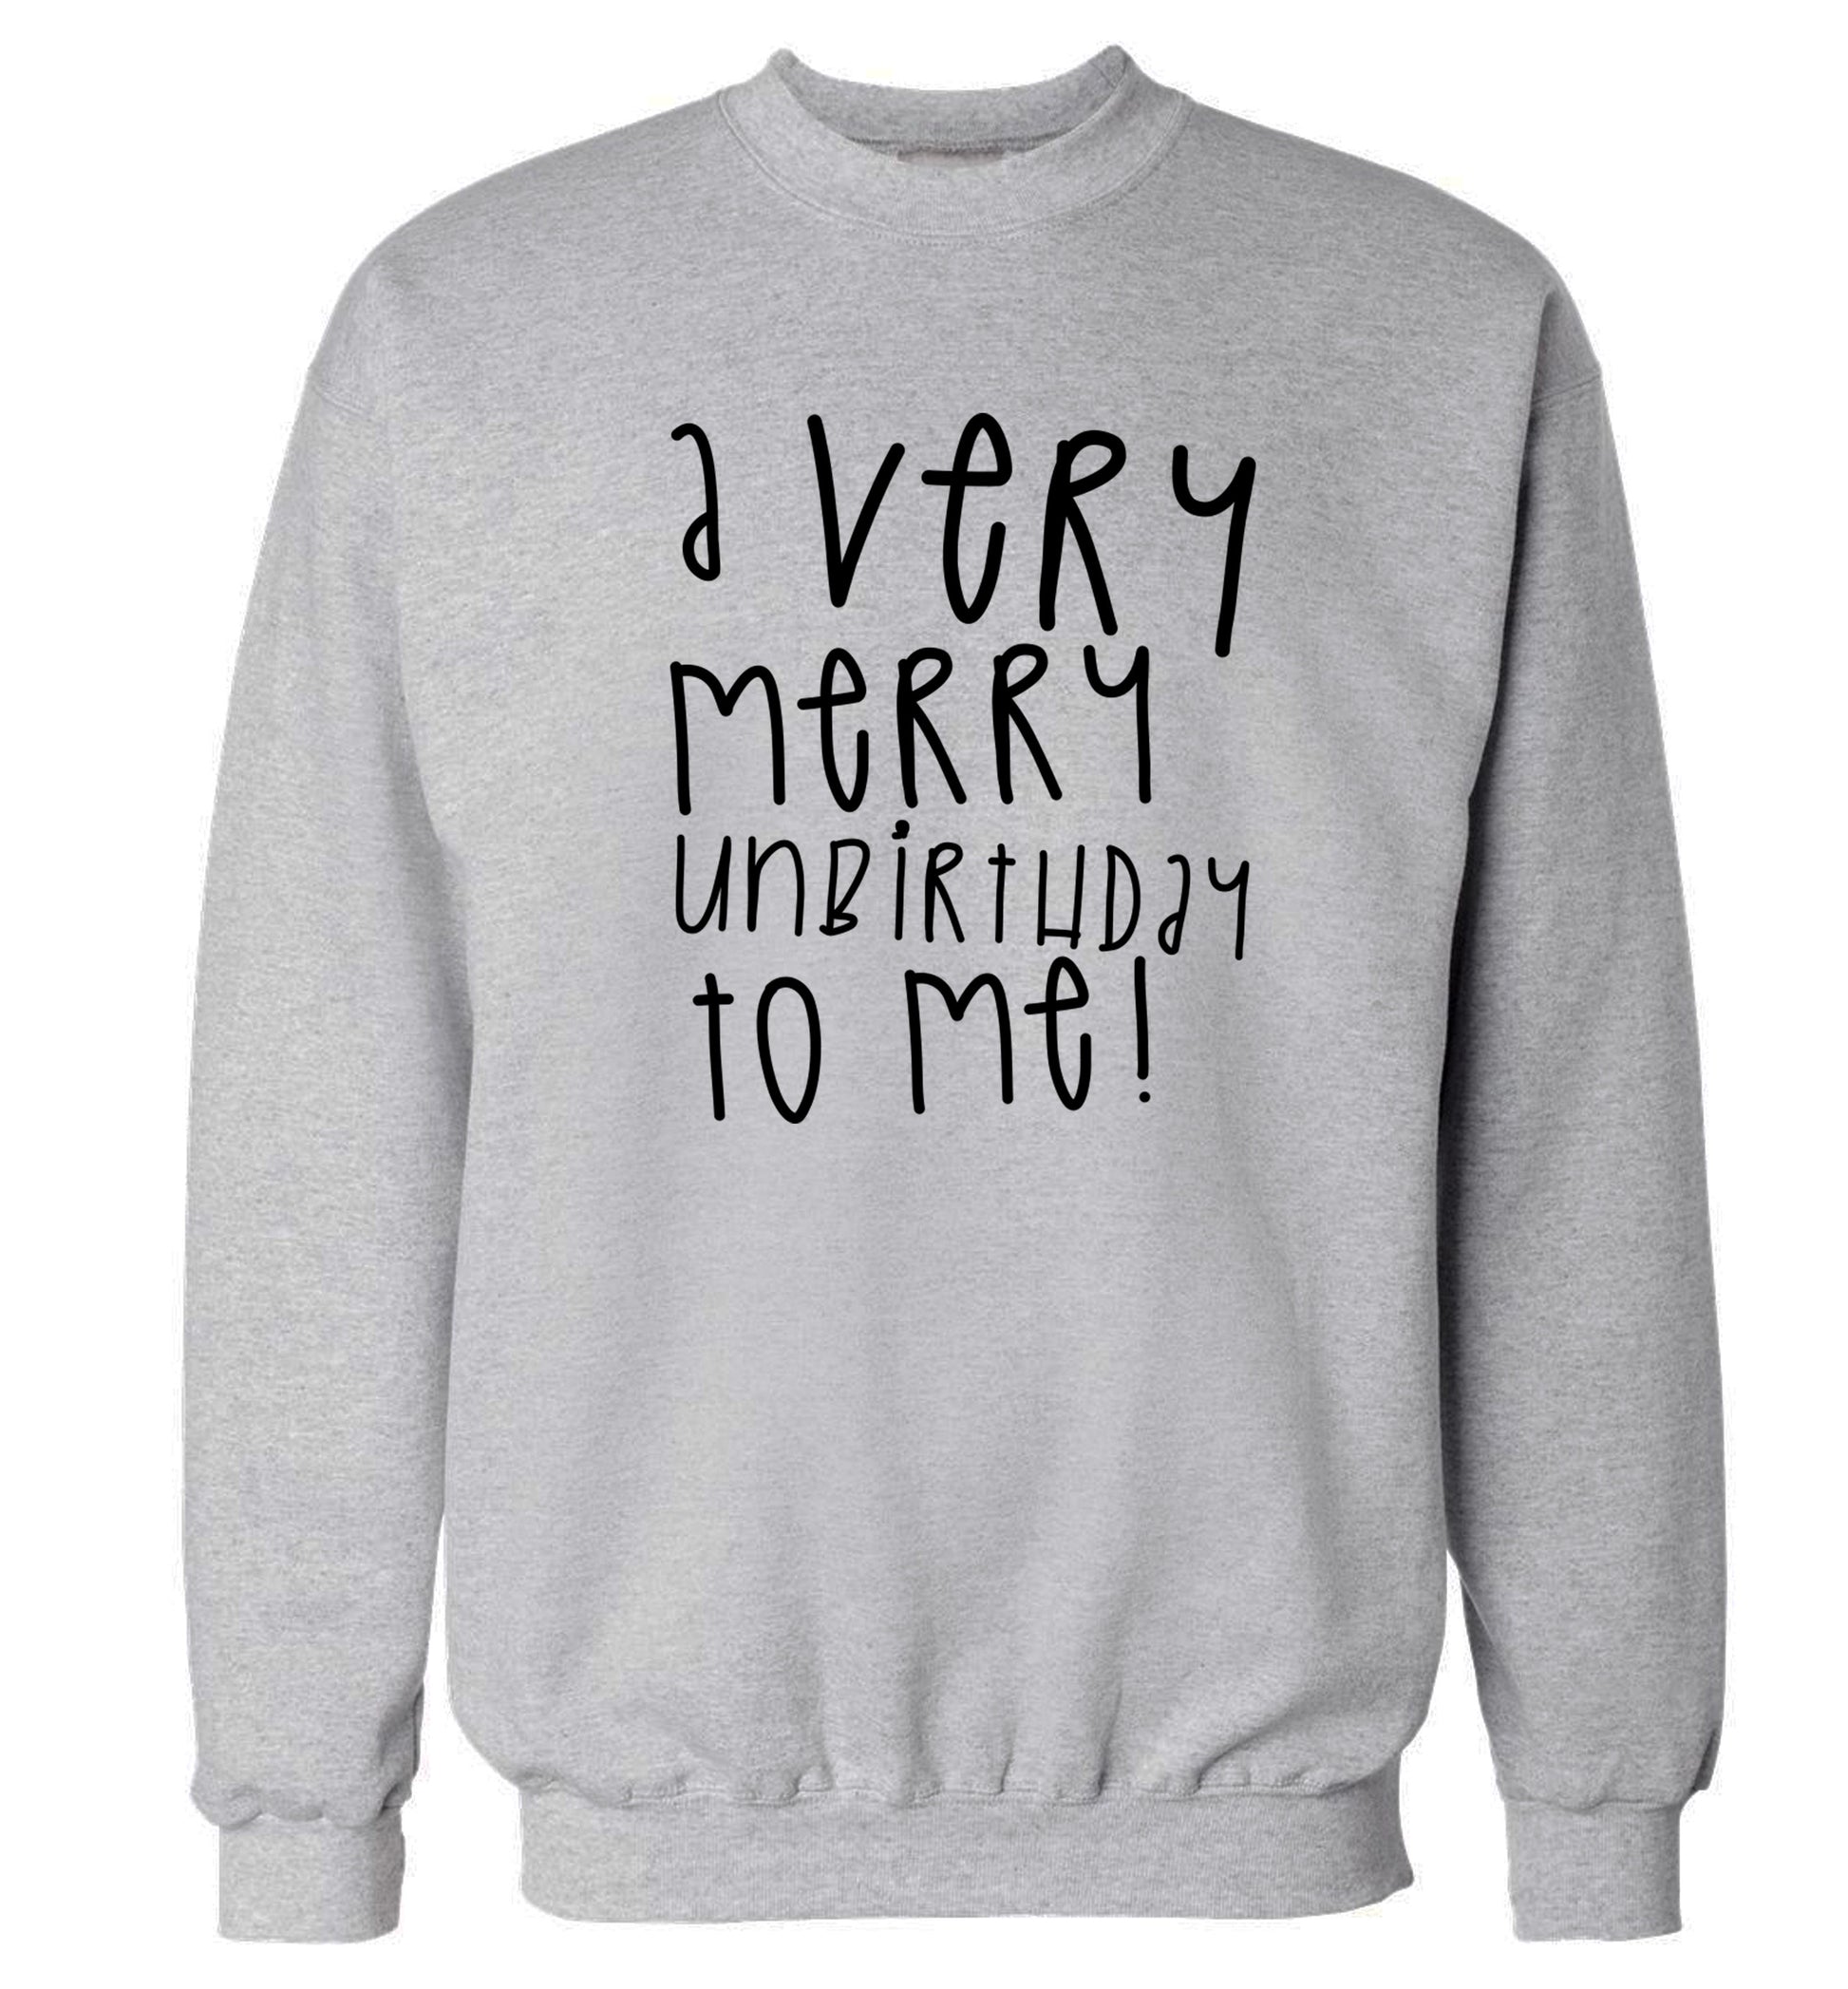 A very merry unbirthday to me! Adult's unisex grey Sweater 2XL